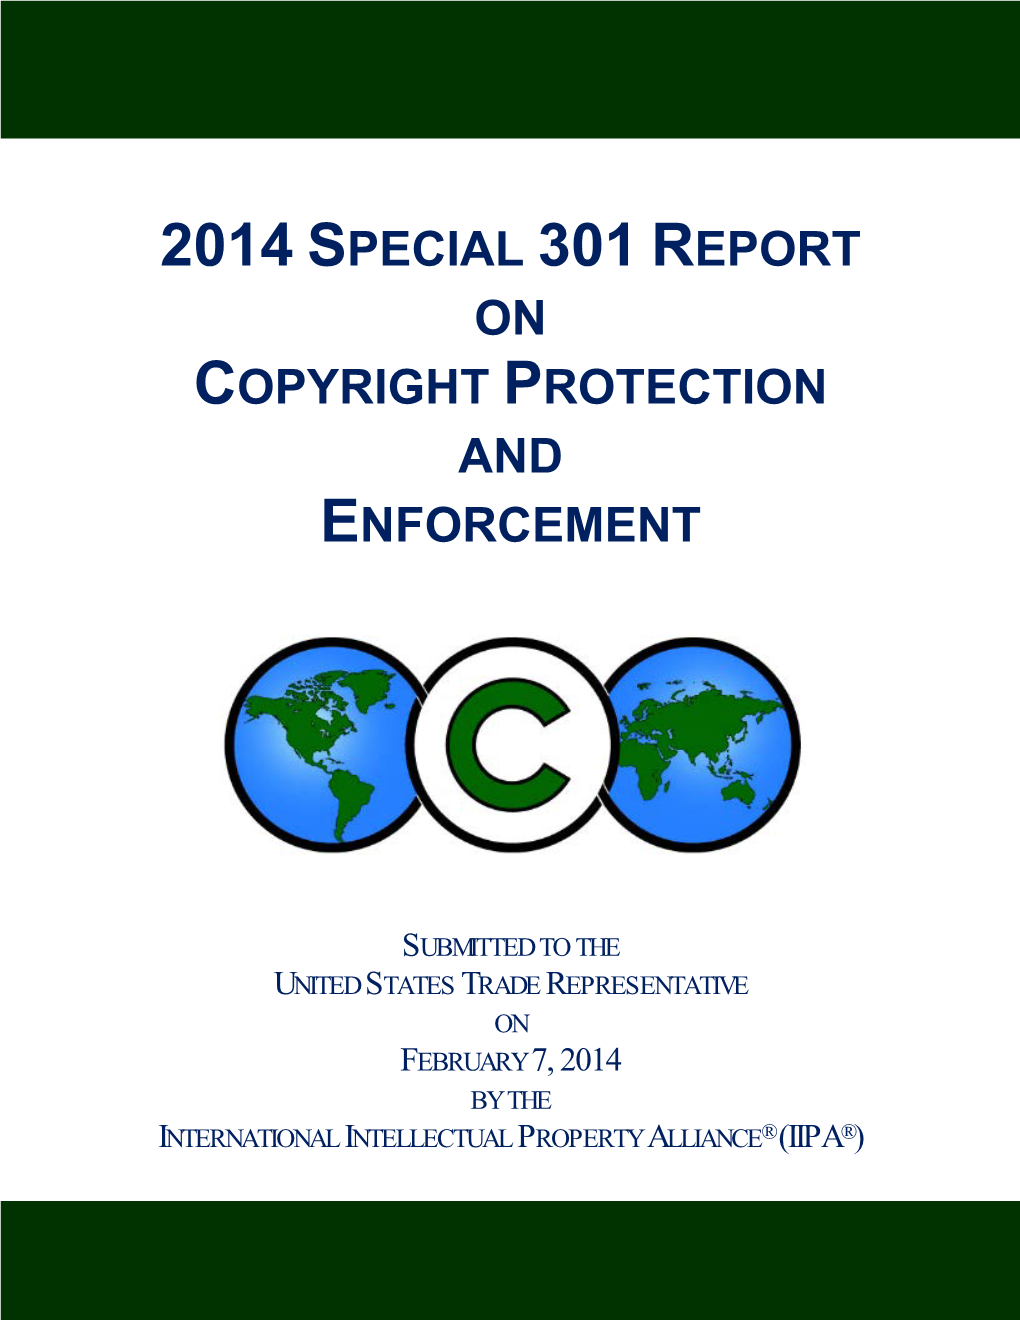 2014 Special 301 Report on Copyright Protection and Enforcement